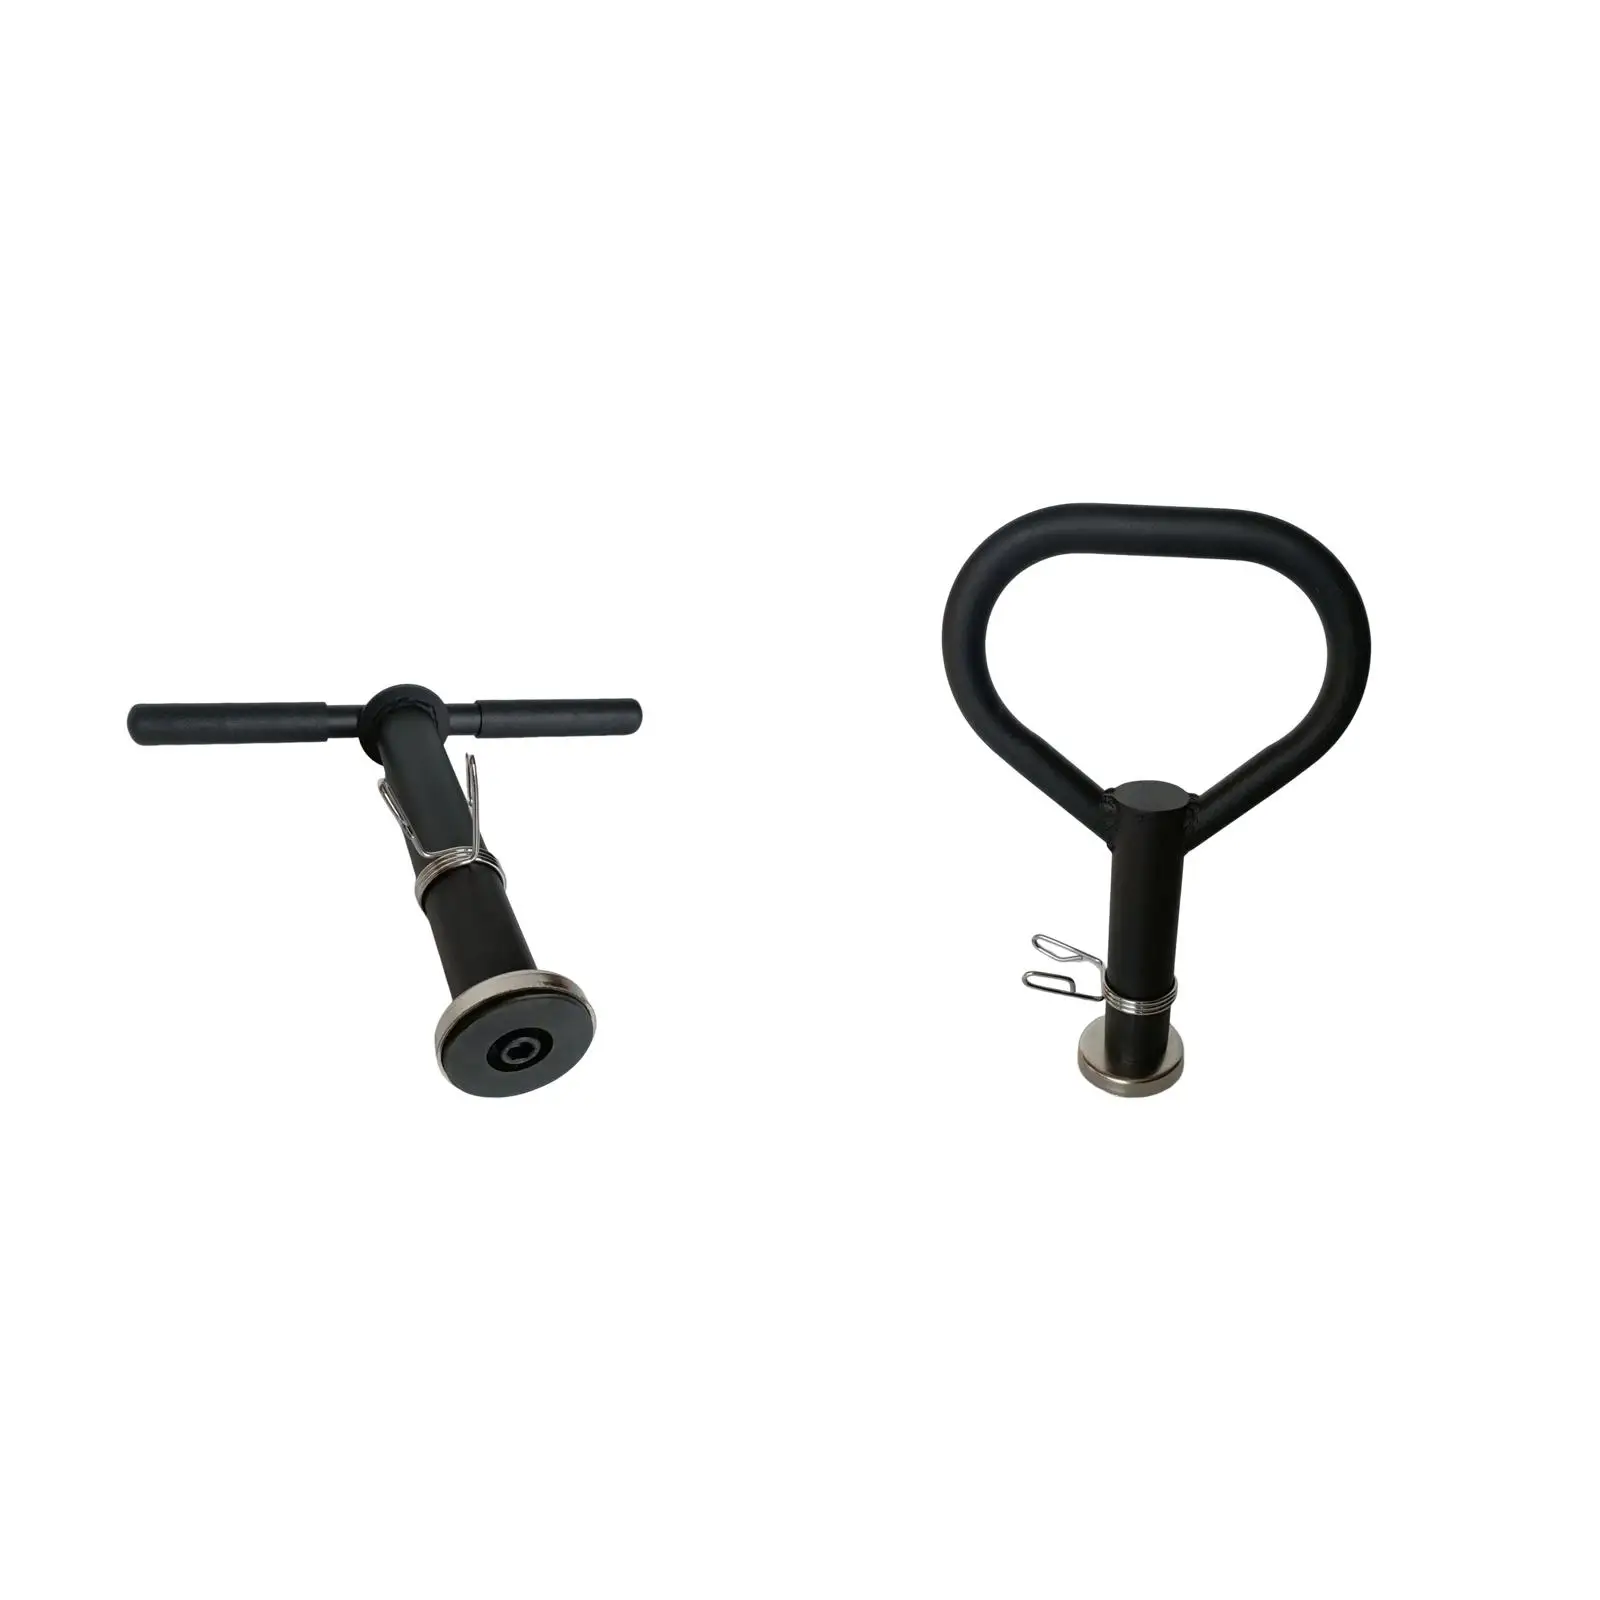 Detachable Kettlebell Handle Fittings, Multifunctional, Convenient with Parts,